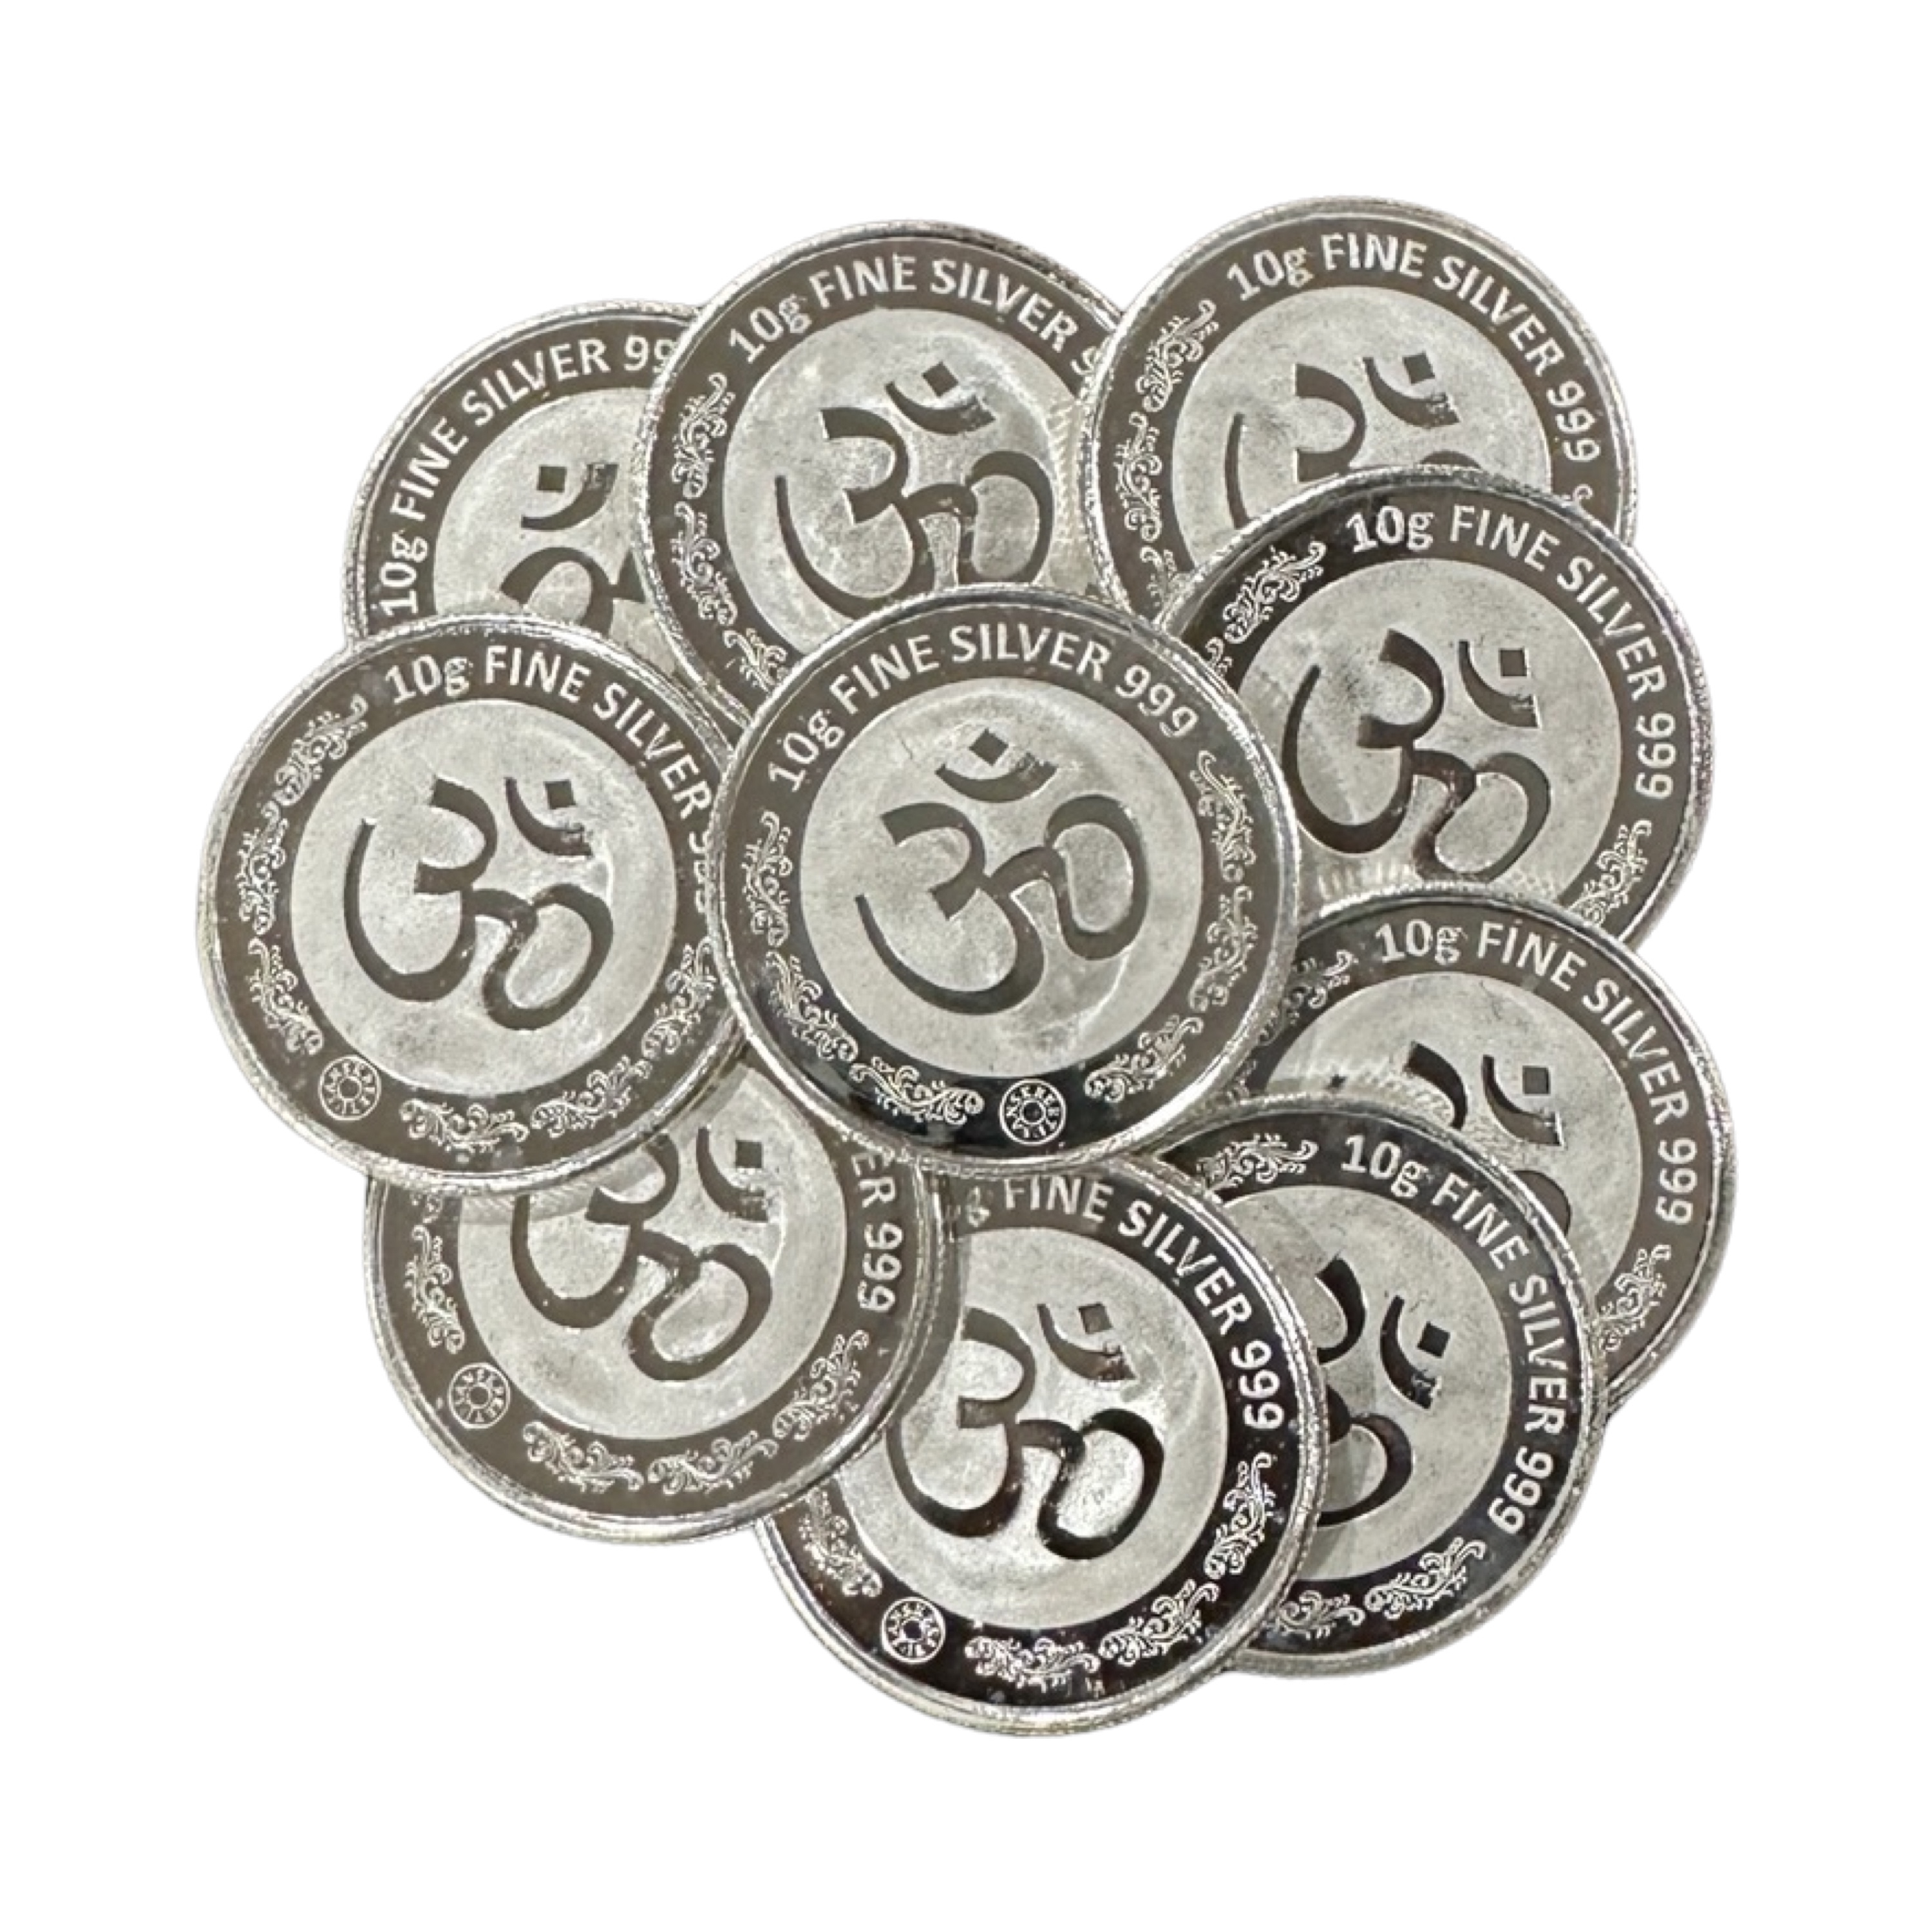  2020 IN 999 Ganesha Lakshmi/Laxmi Solid Pure Silver Ten Gram Coin  Silver Perfect Uncirculated : Everything Else